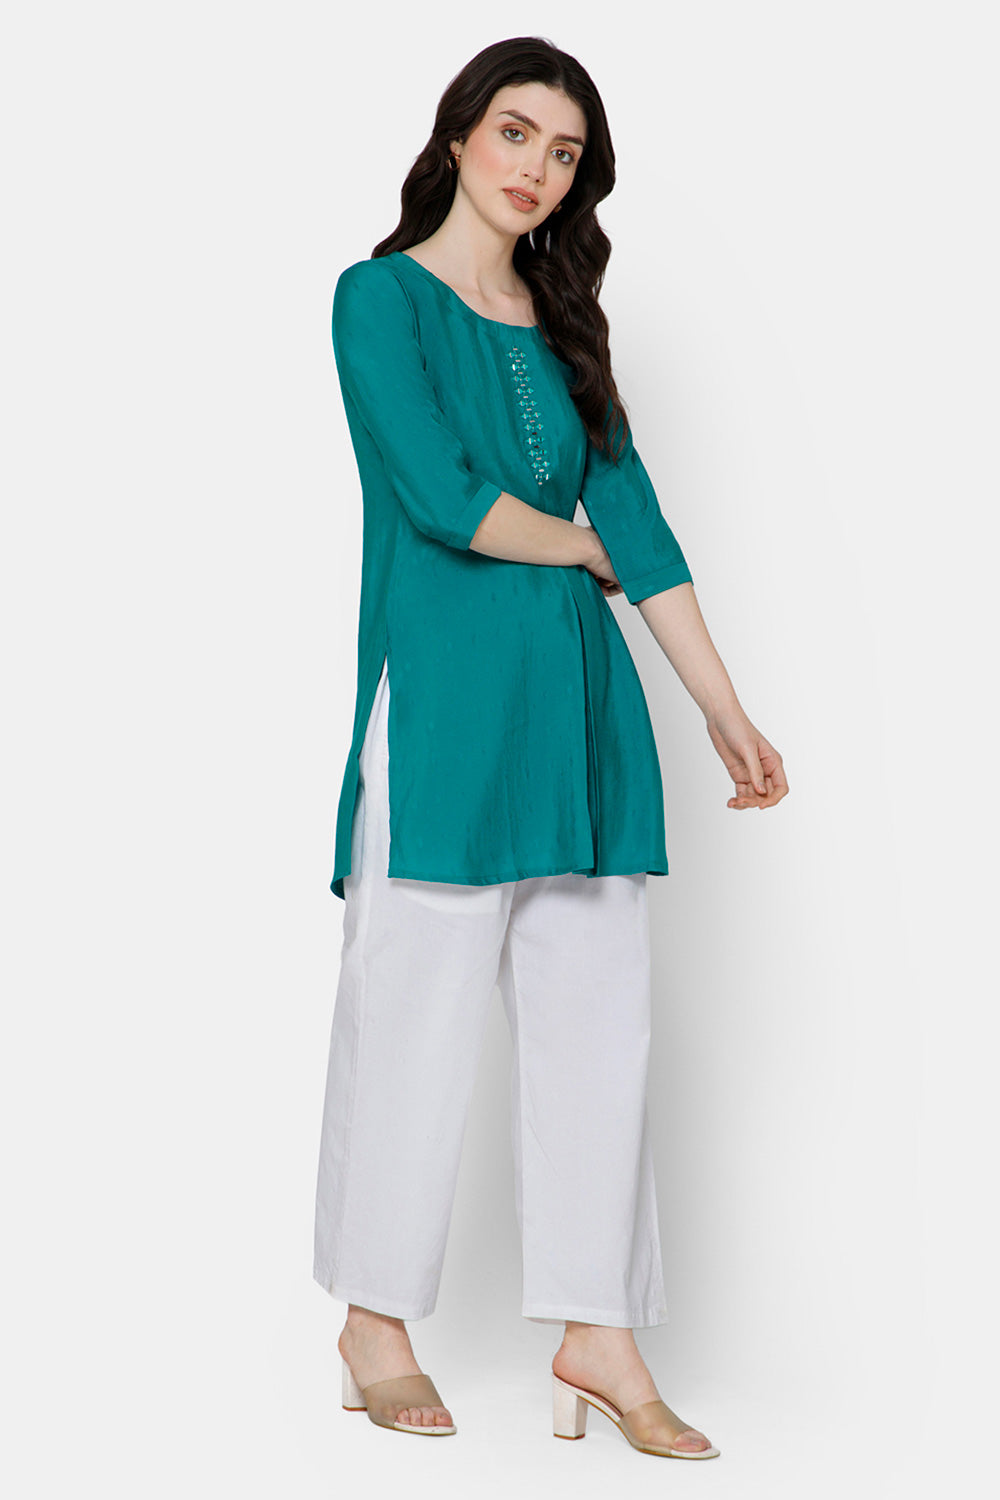 Mythri Women's Casual Tops with Mirror Work At The Center Front  - Blue - E021